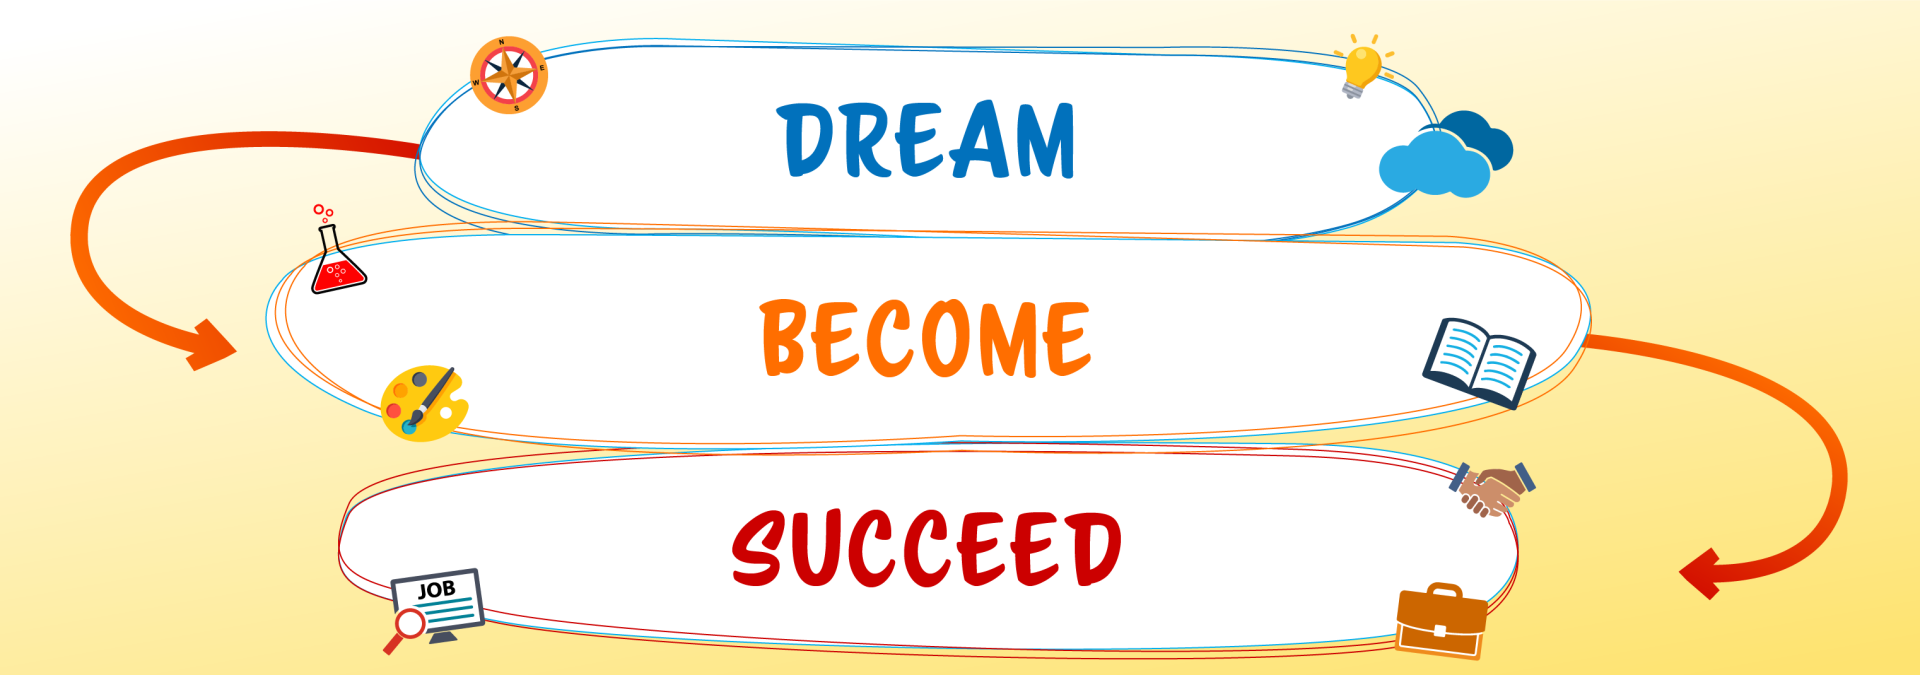 Dream Become Succeed